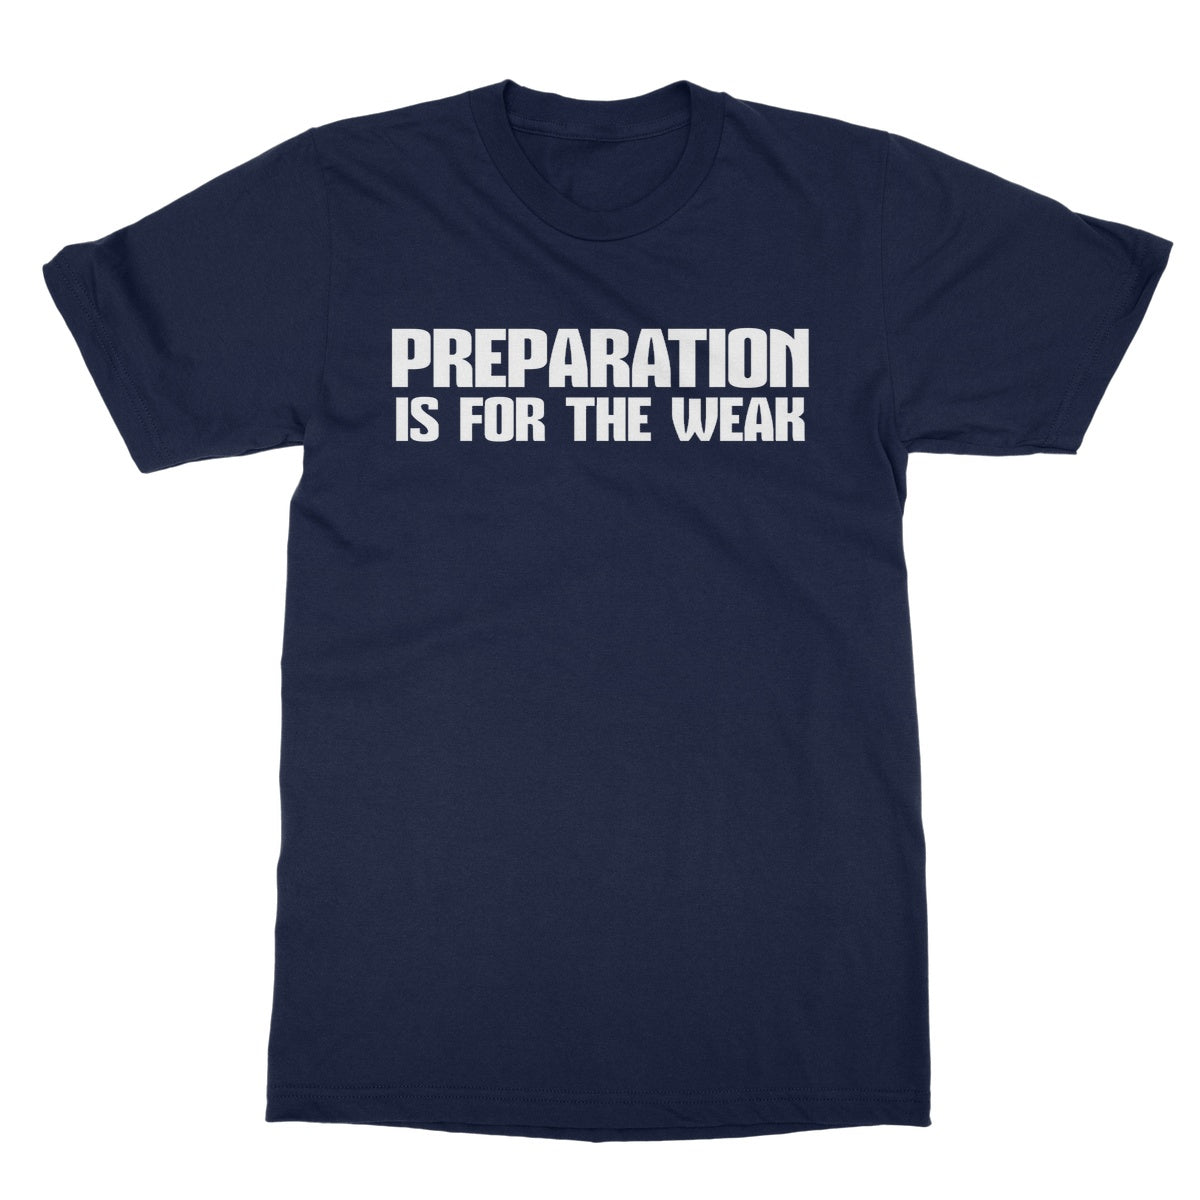 preparation is for the weak t shirt navy